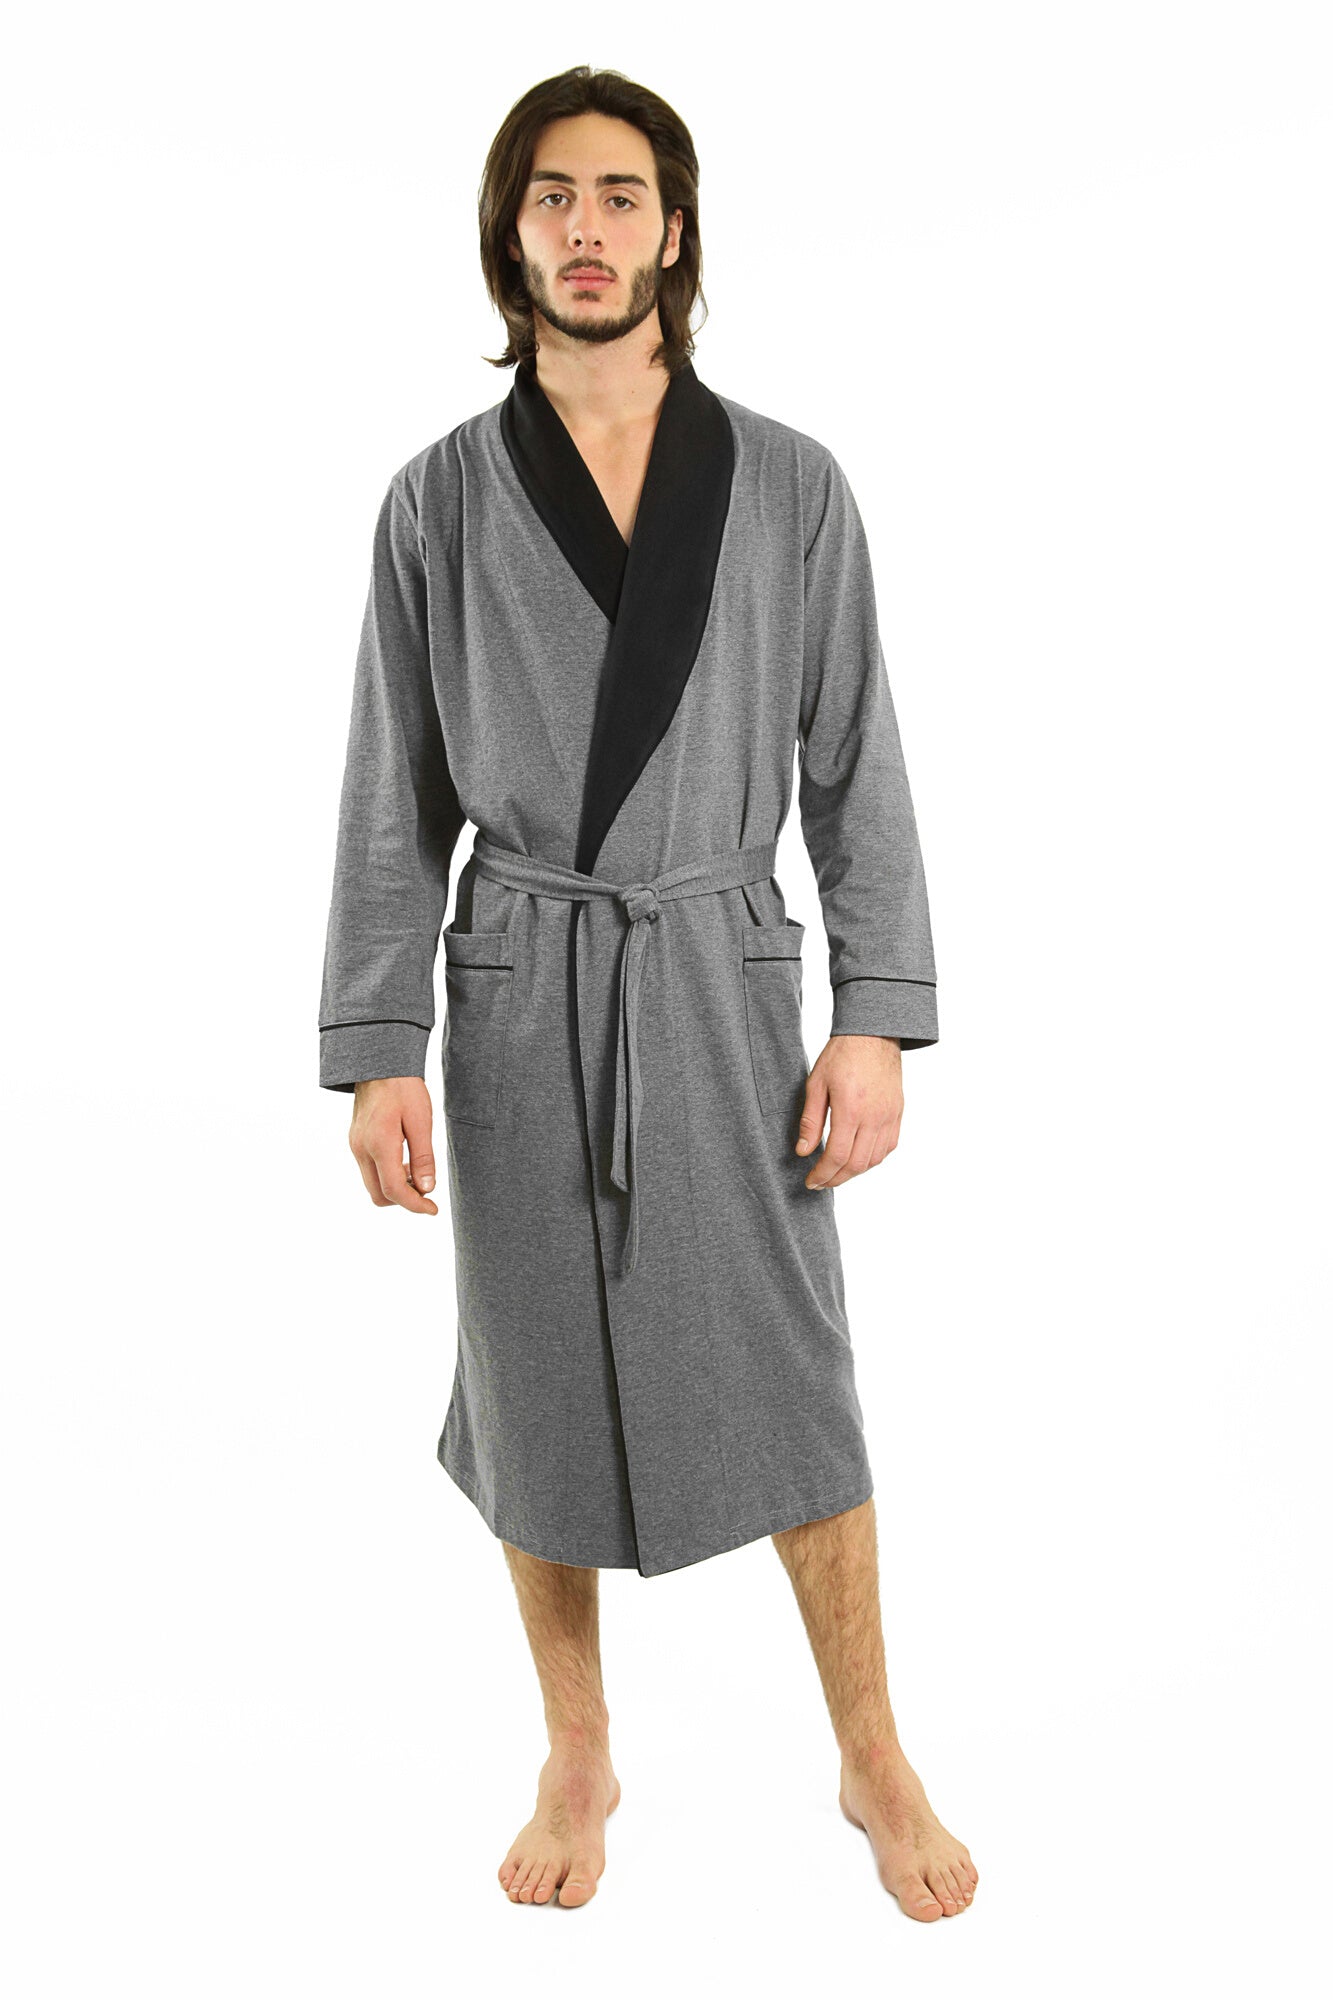 Mens Yugo Support Cotton Knit #9280 Robe